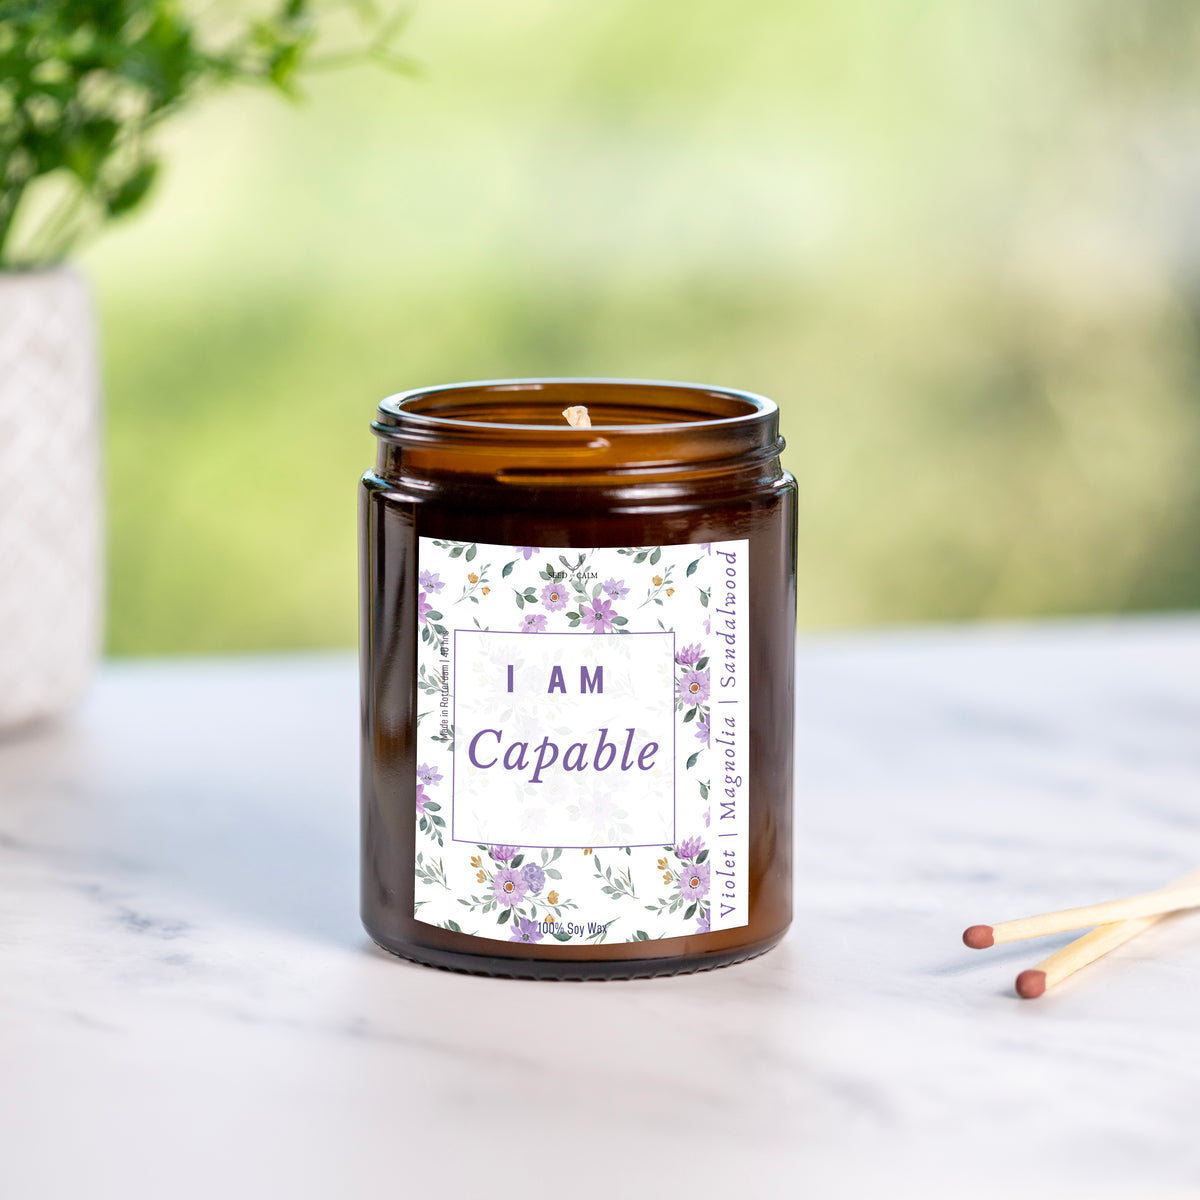 I Am Capable - Aromatherapy Candle